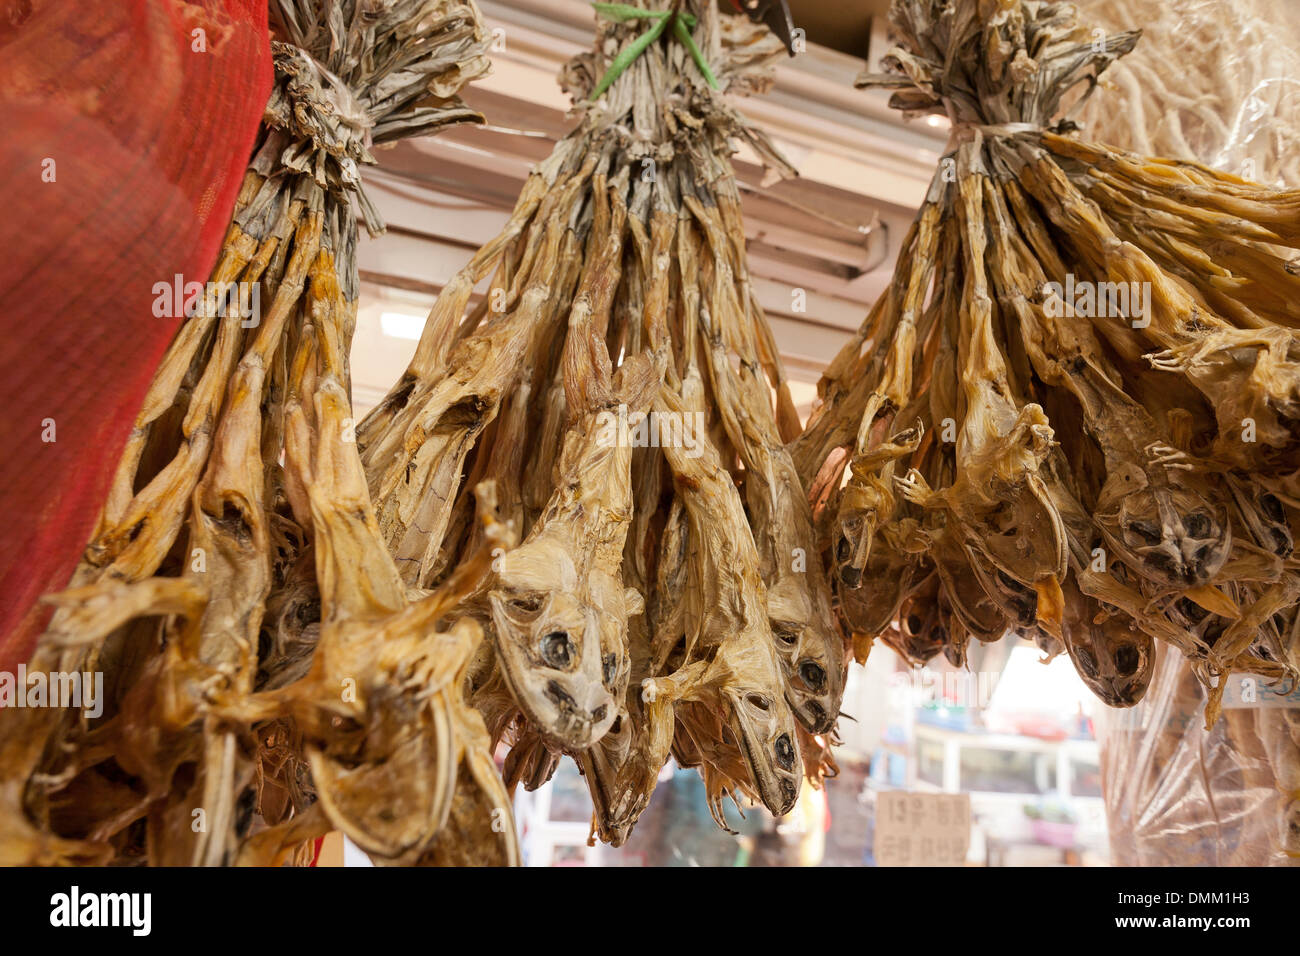 Skinned and dried frogs at Korean traditional medicine store - Busan, South Korea Stock Photo